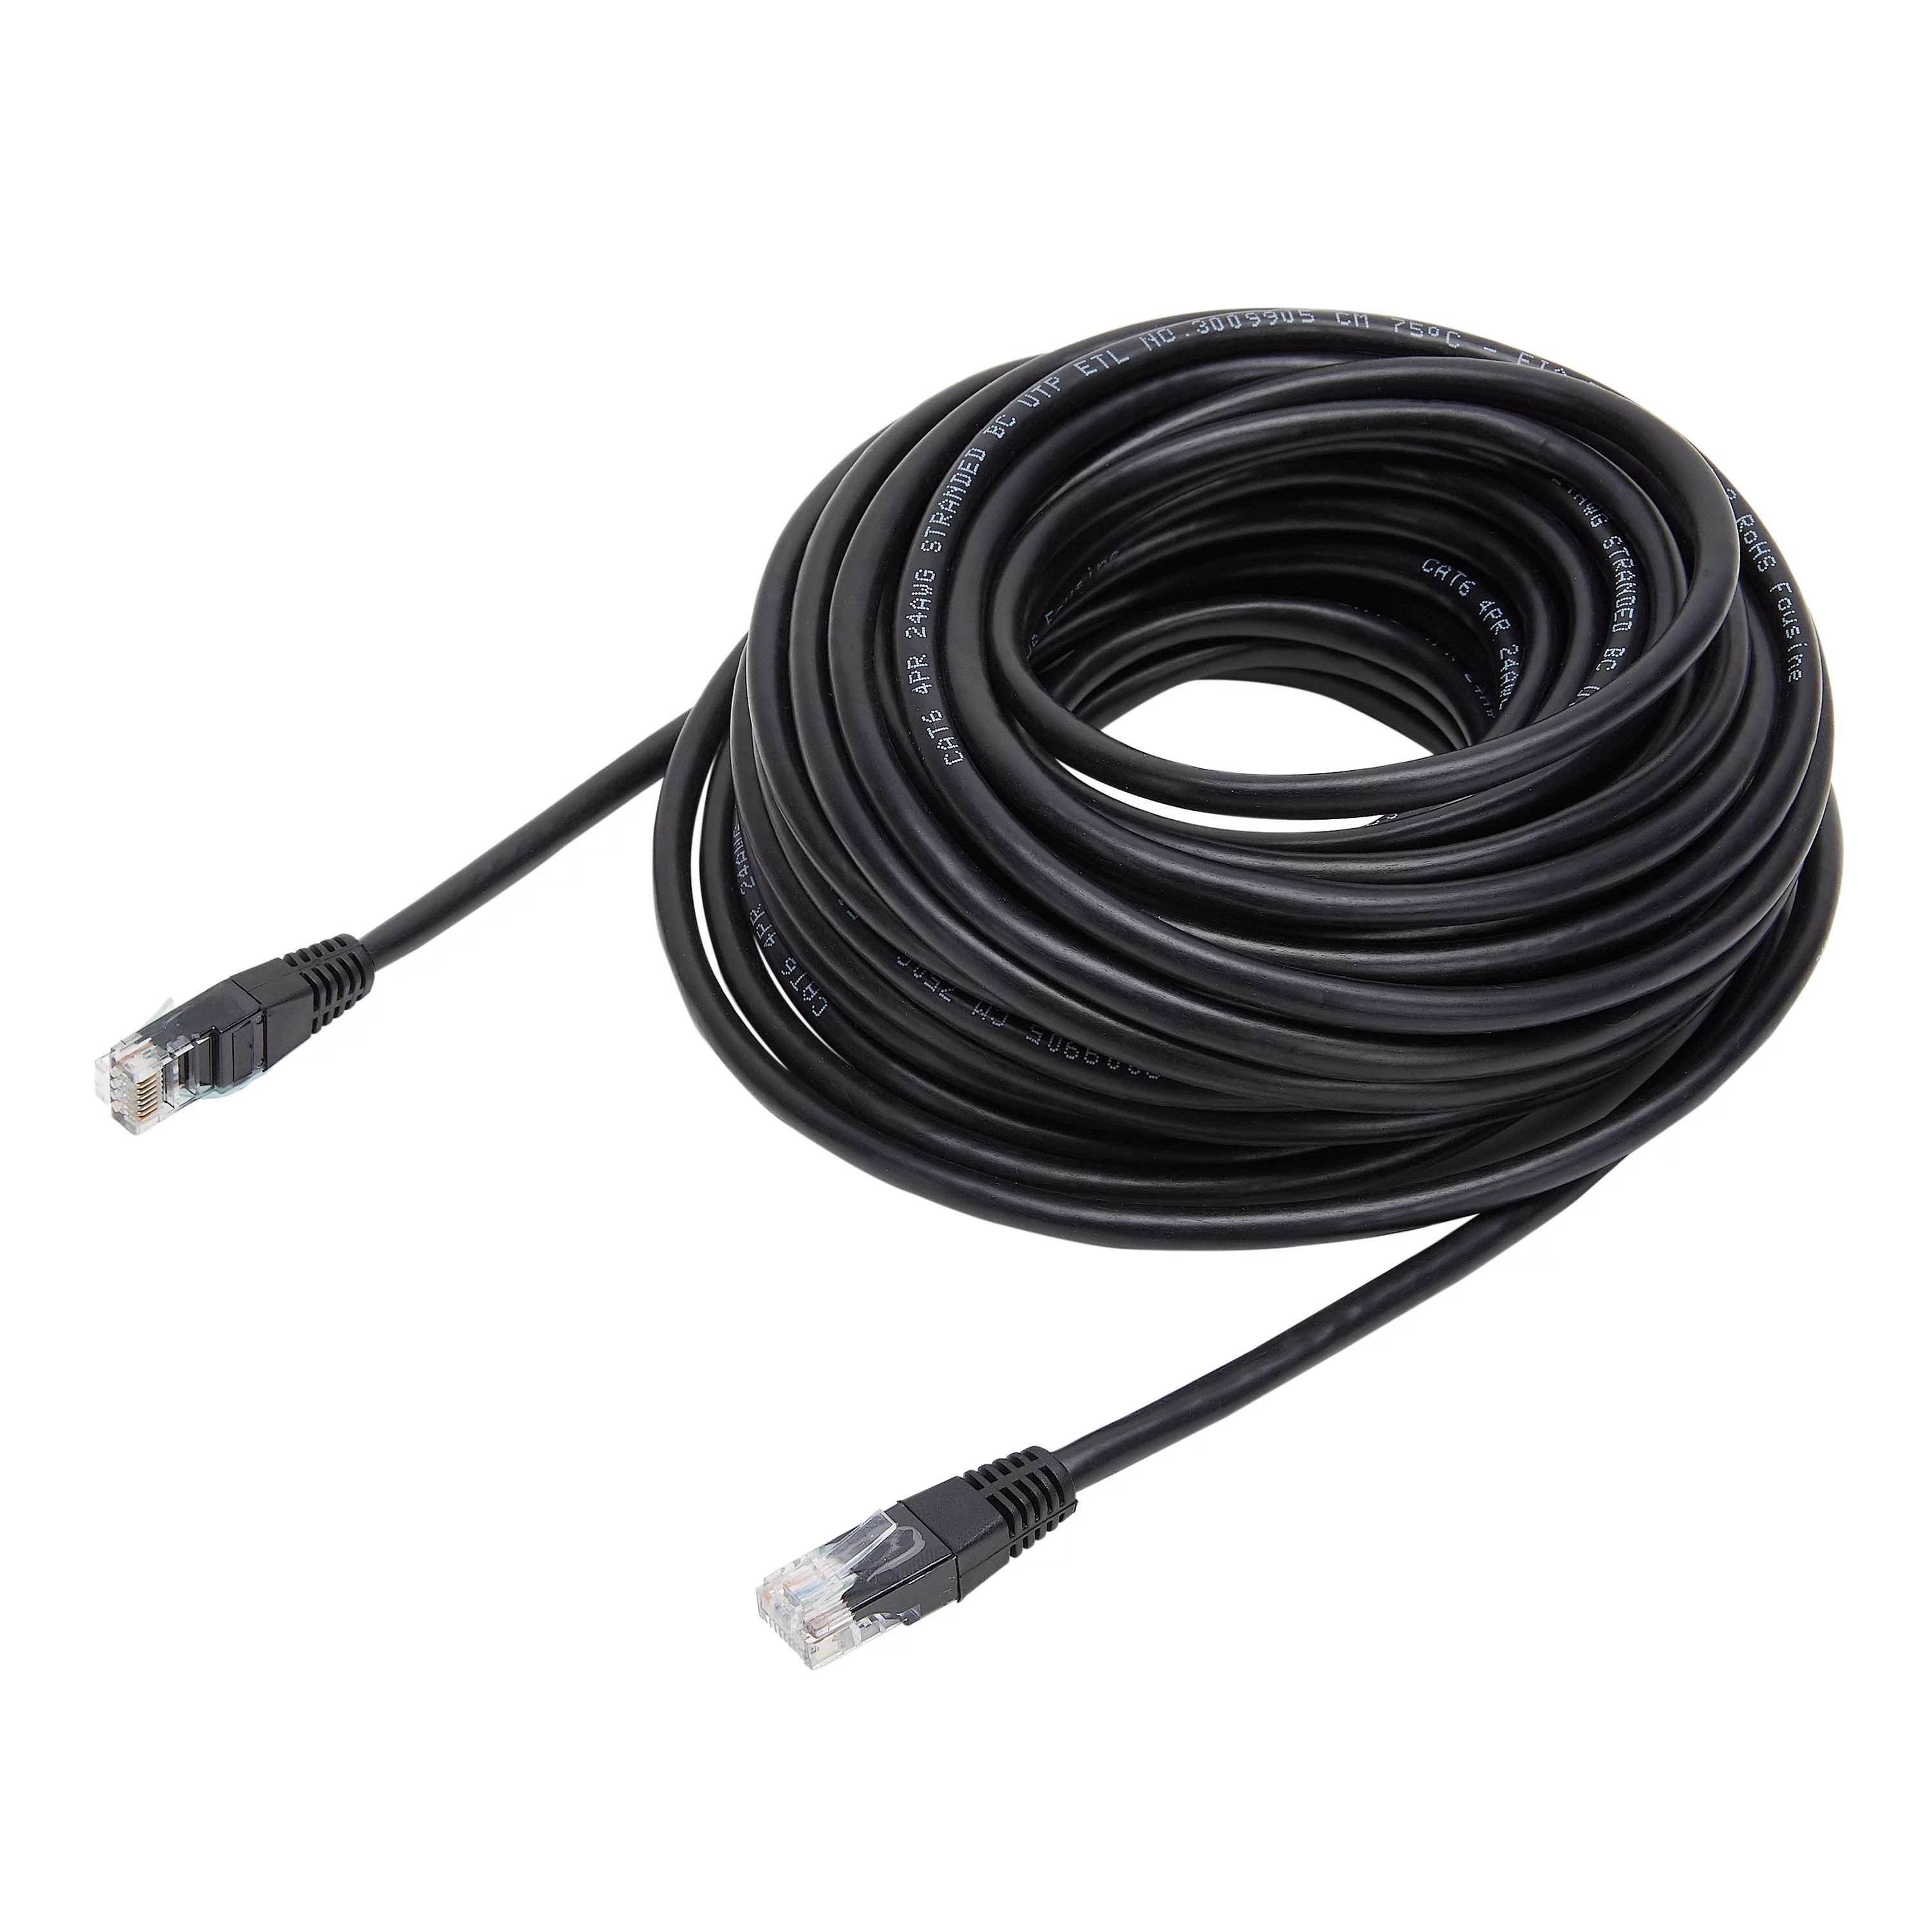 15 Best 50-Foot Ethernet Cables for 2023